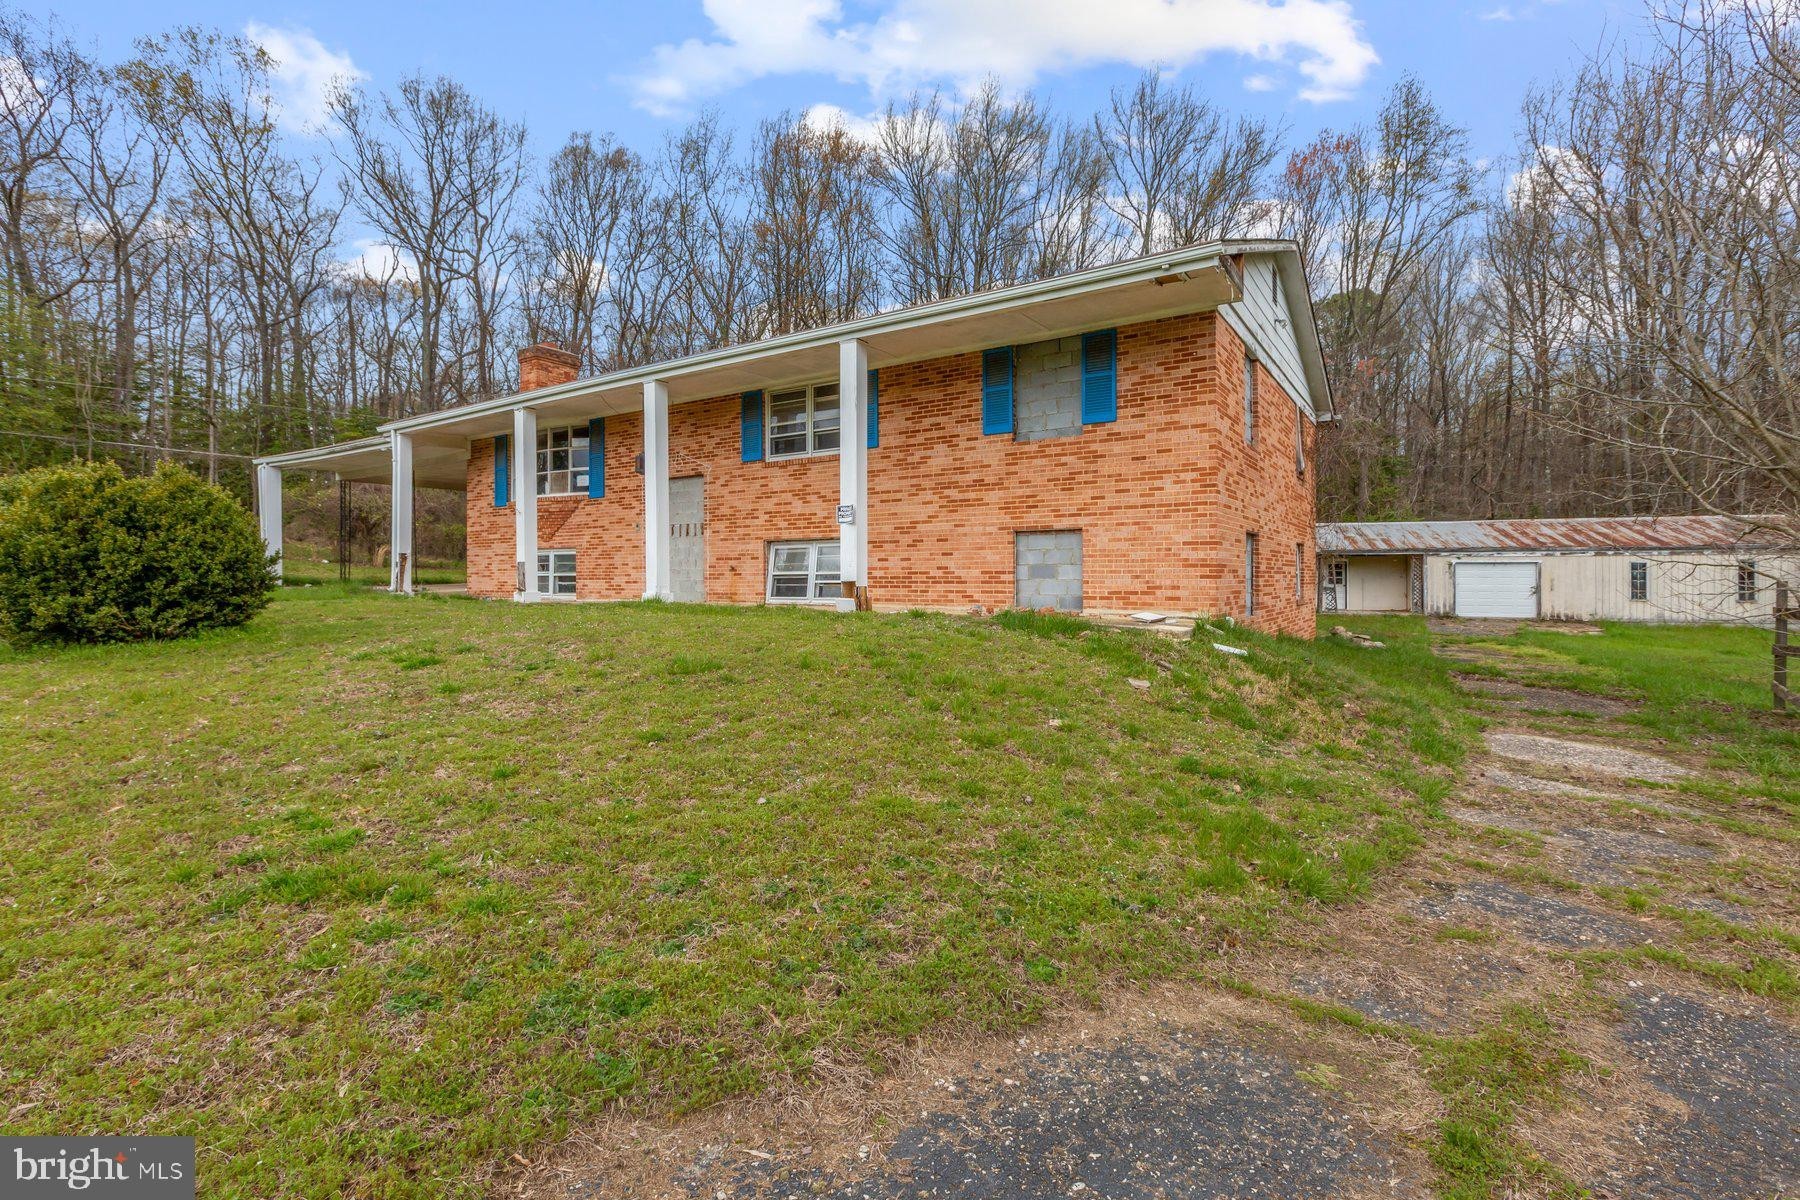 2. 9800 Rosaryville Road